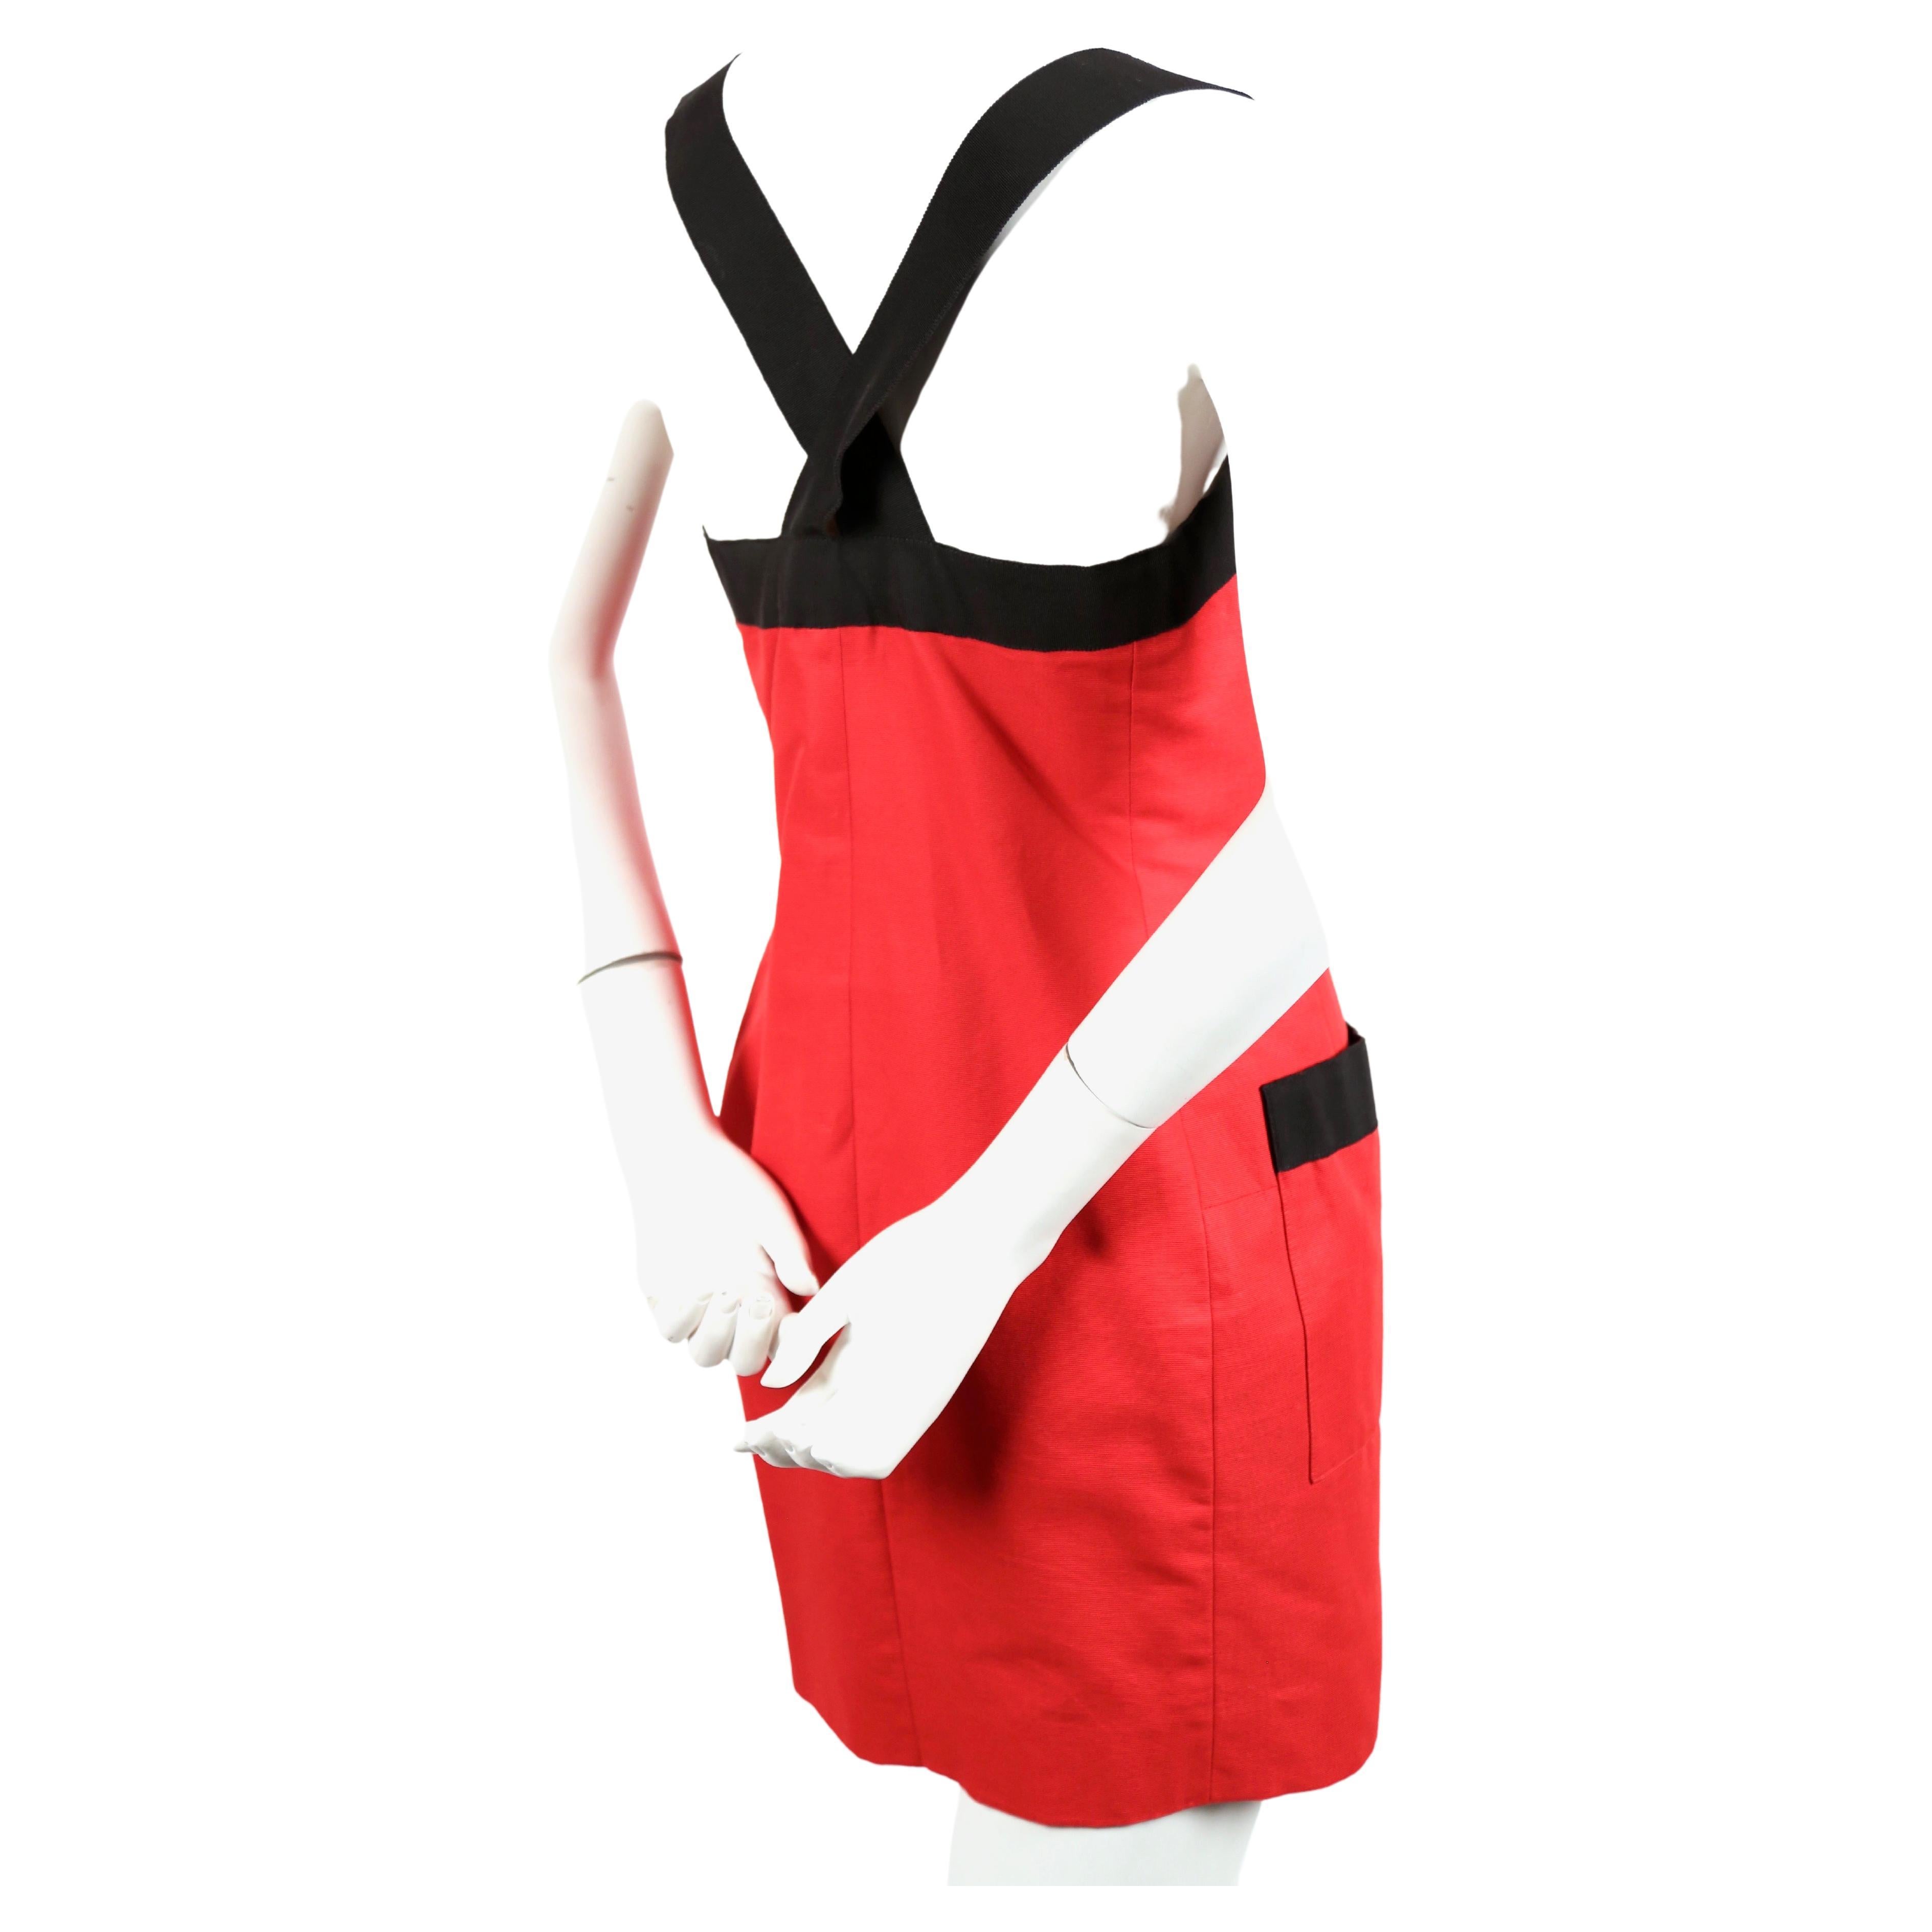 Red cotton mini dress with wide black grosgrain ribbon trim by Yves Saint dating to the 1990's. Dress is labeled a French size 40. Dress measures approximately: 36” at bust, 32” at waist and at the hips 36”. Button front closure. Fabric content: